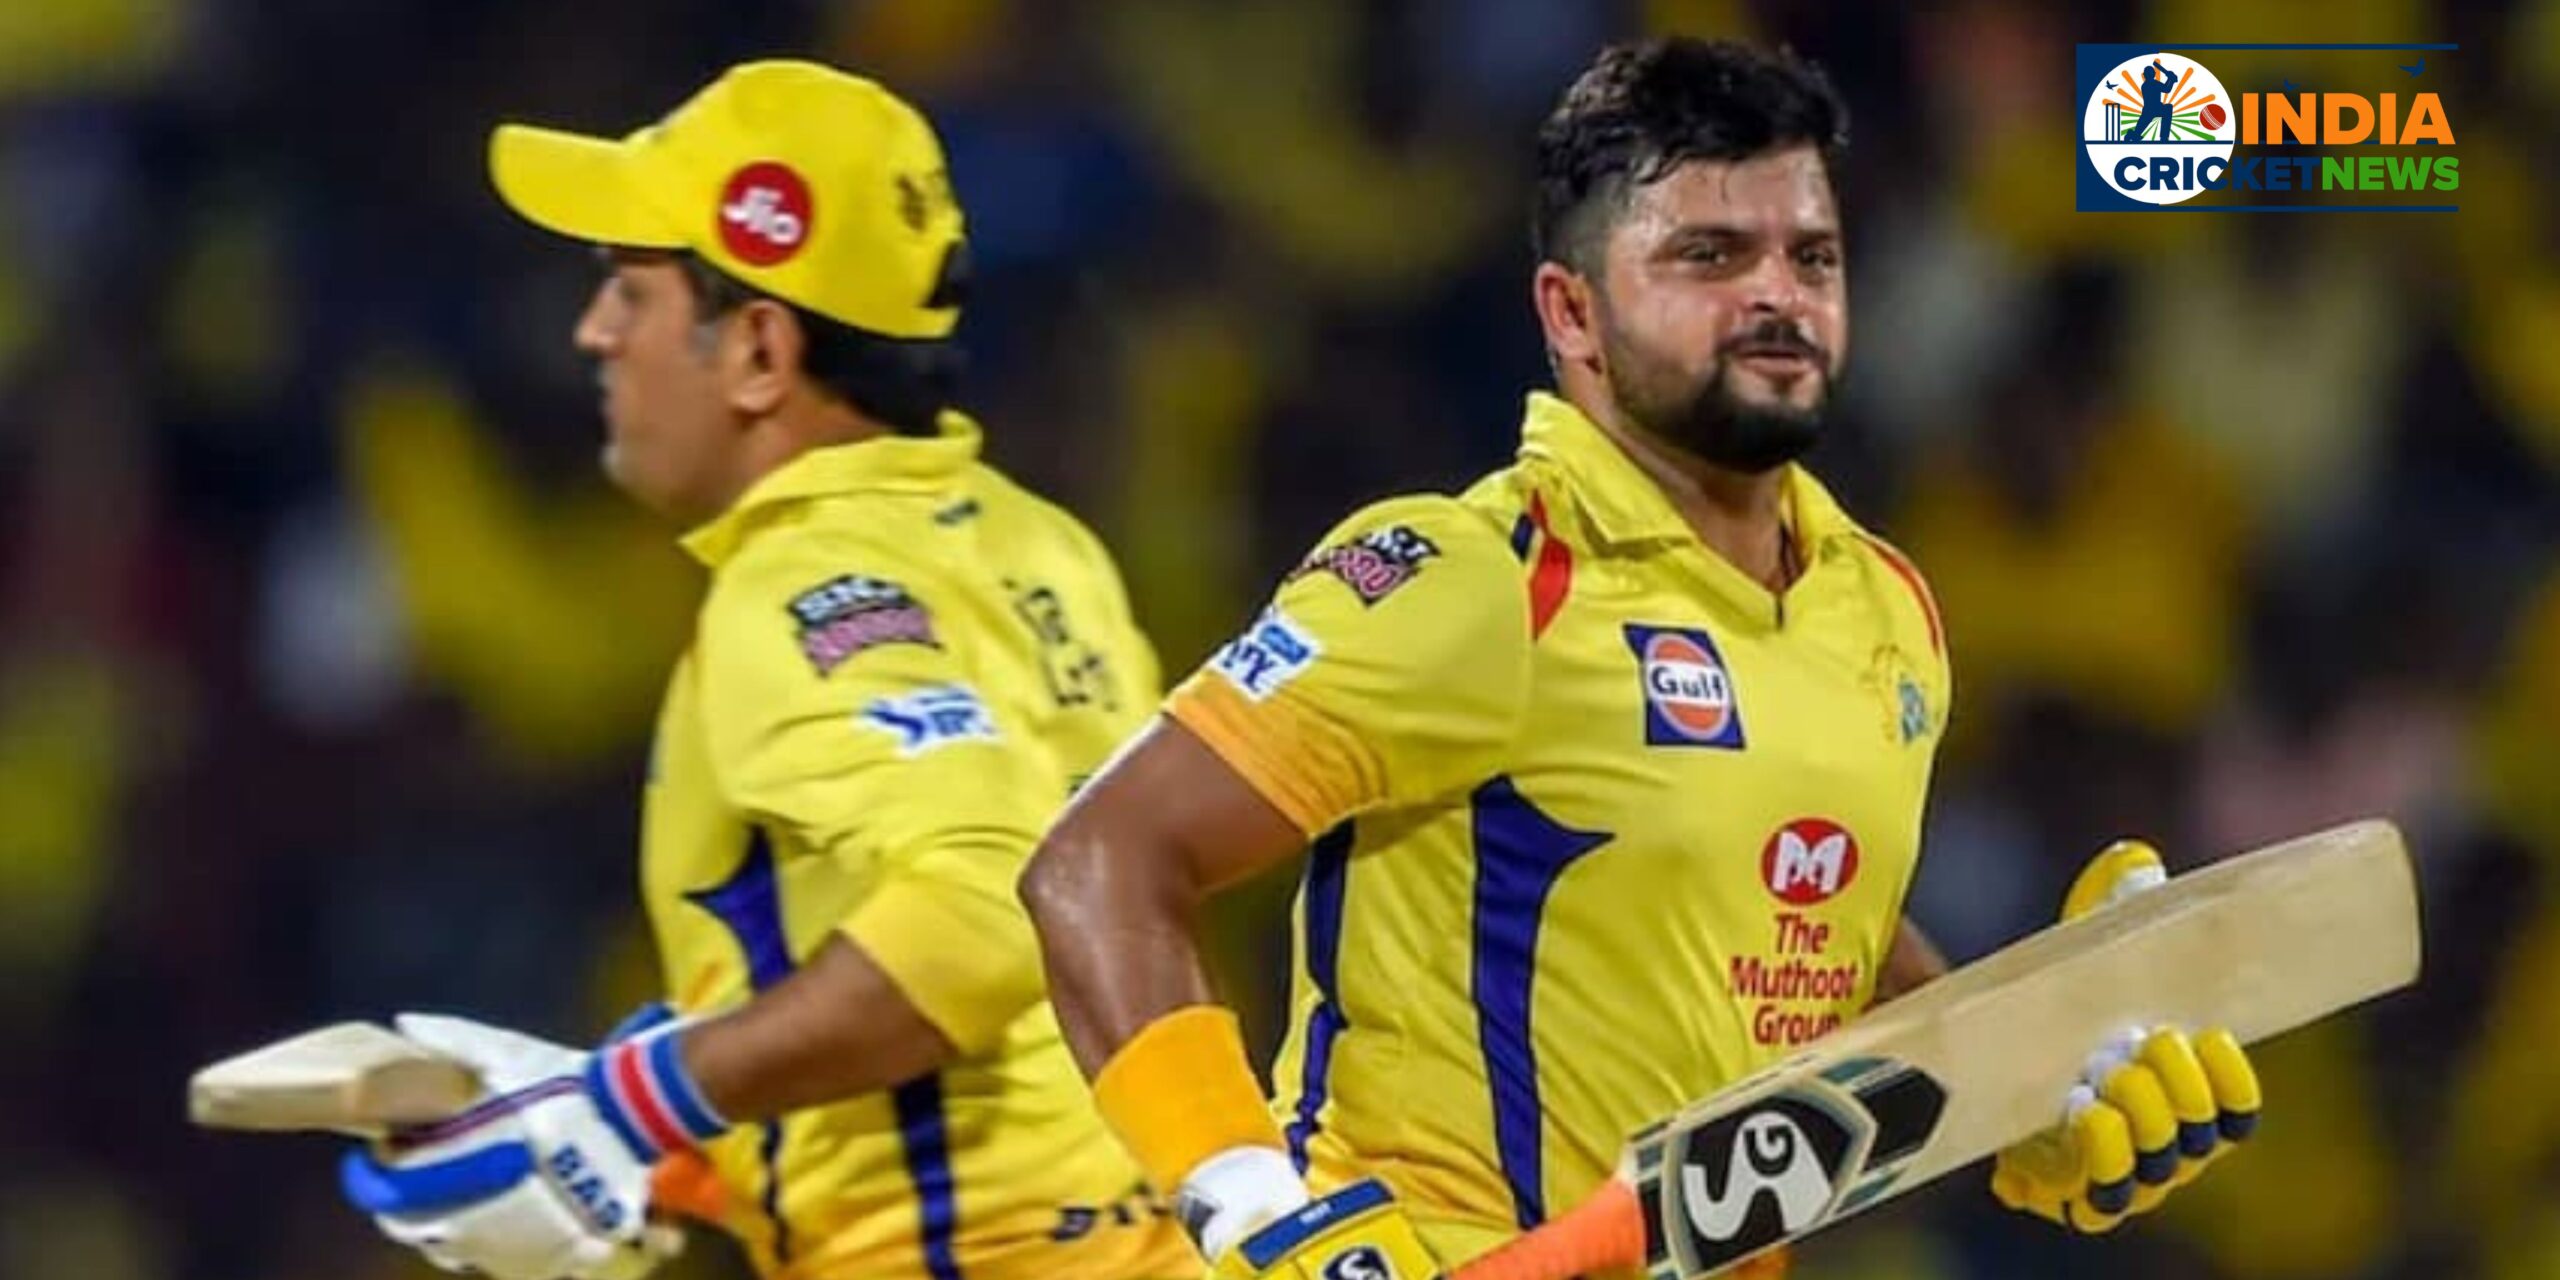 Suresh Raina on the Unexpected IPL 2020 Season Withdrawal: "Gangsters Killed Entire Family"